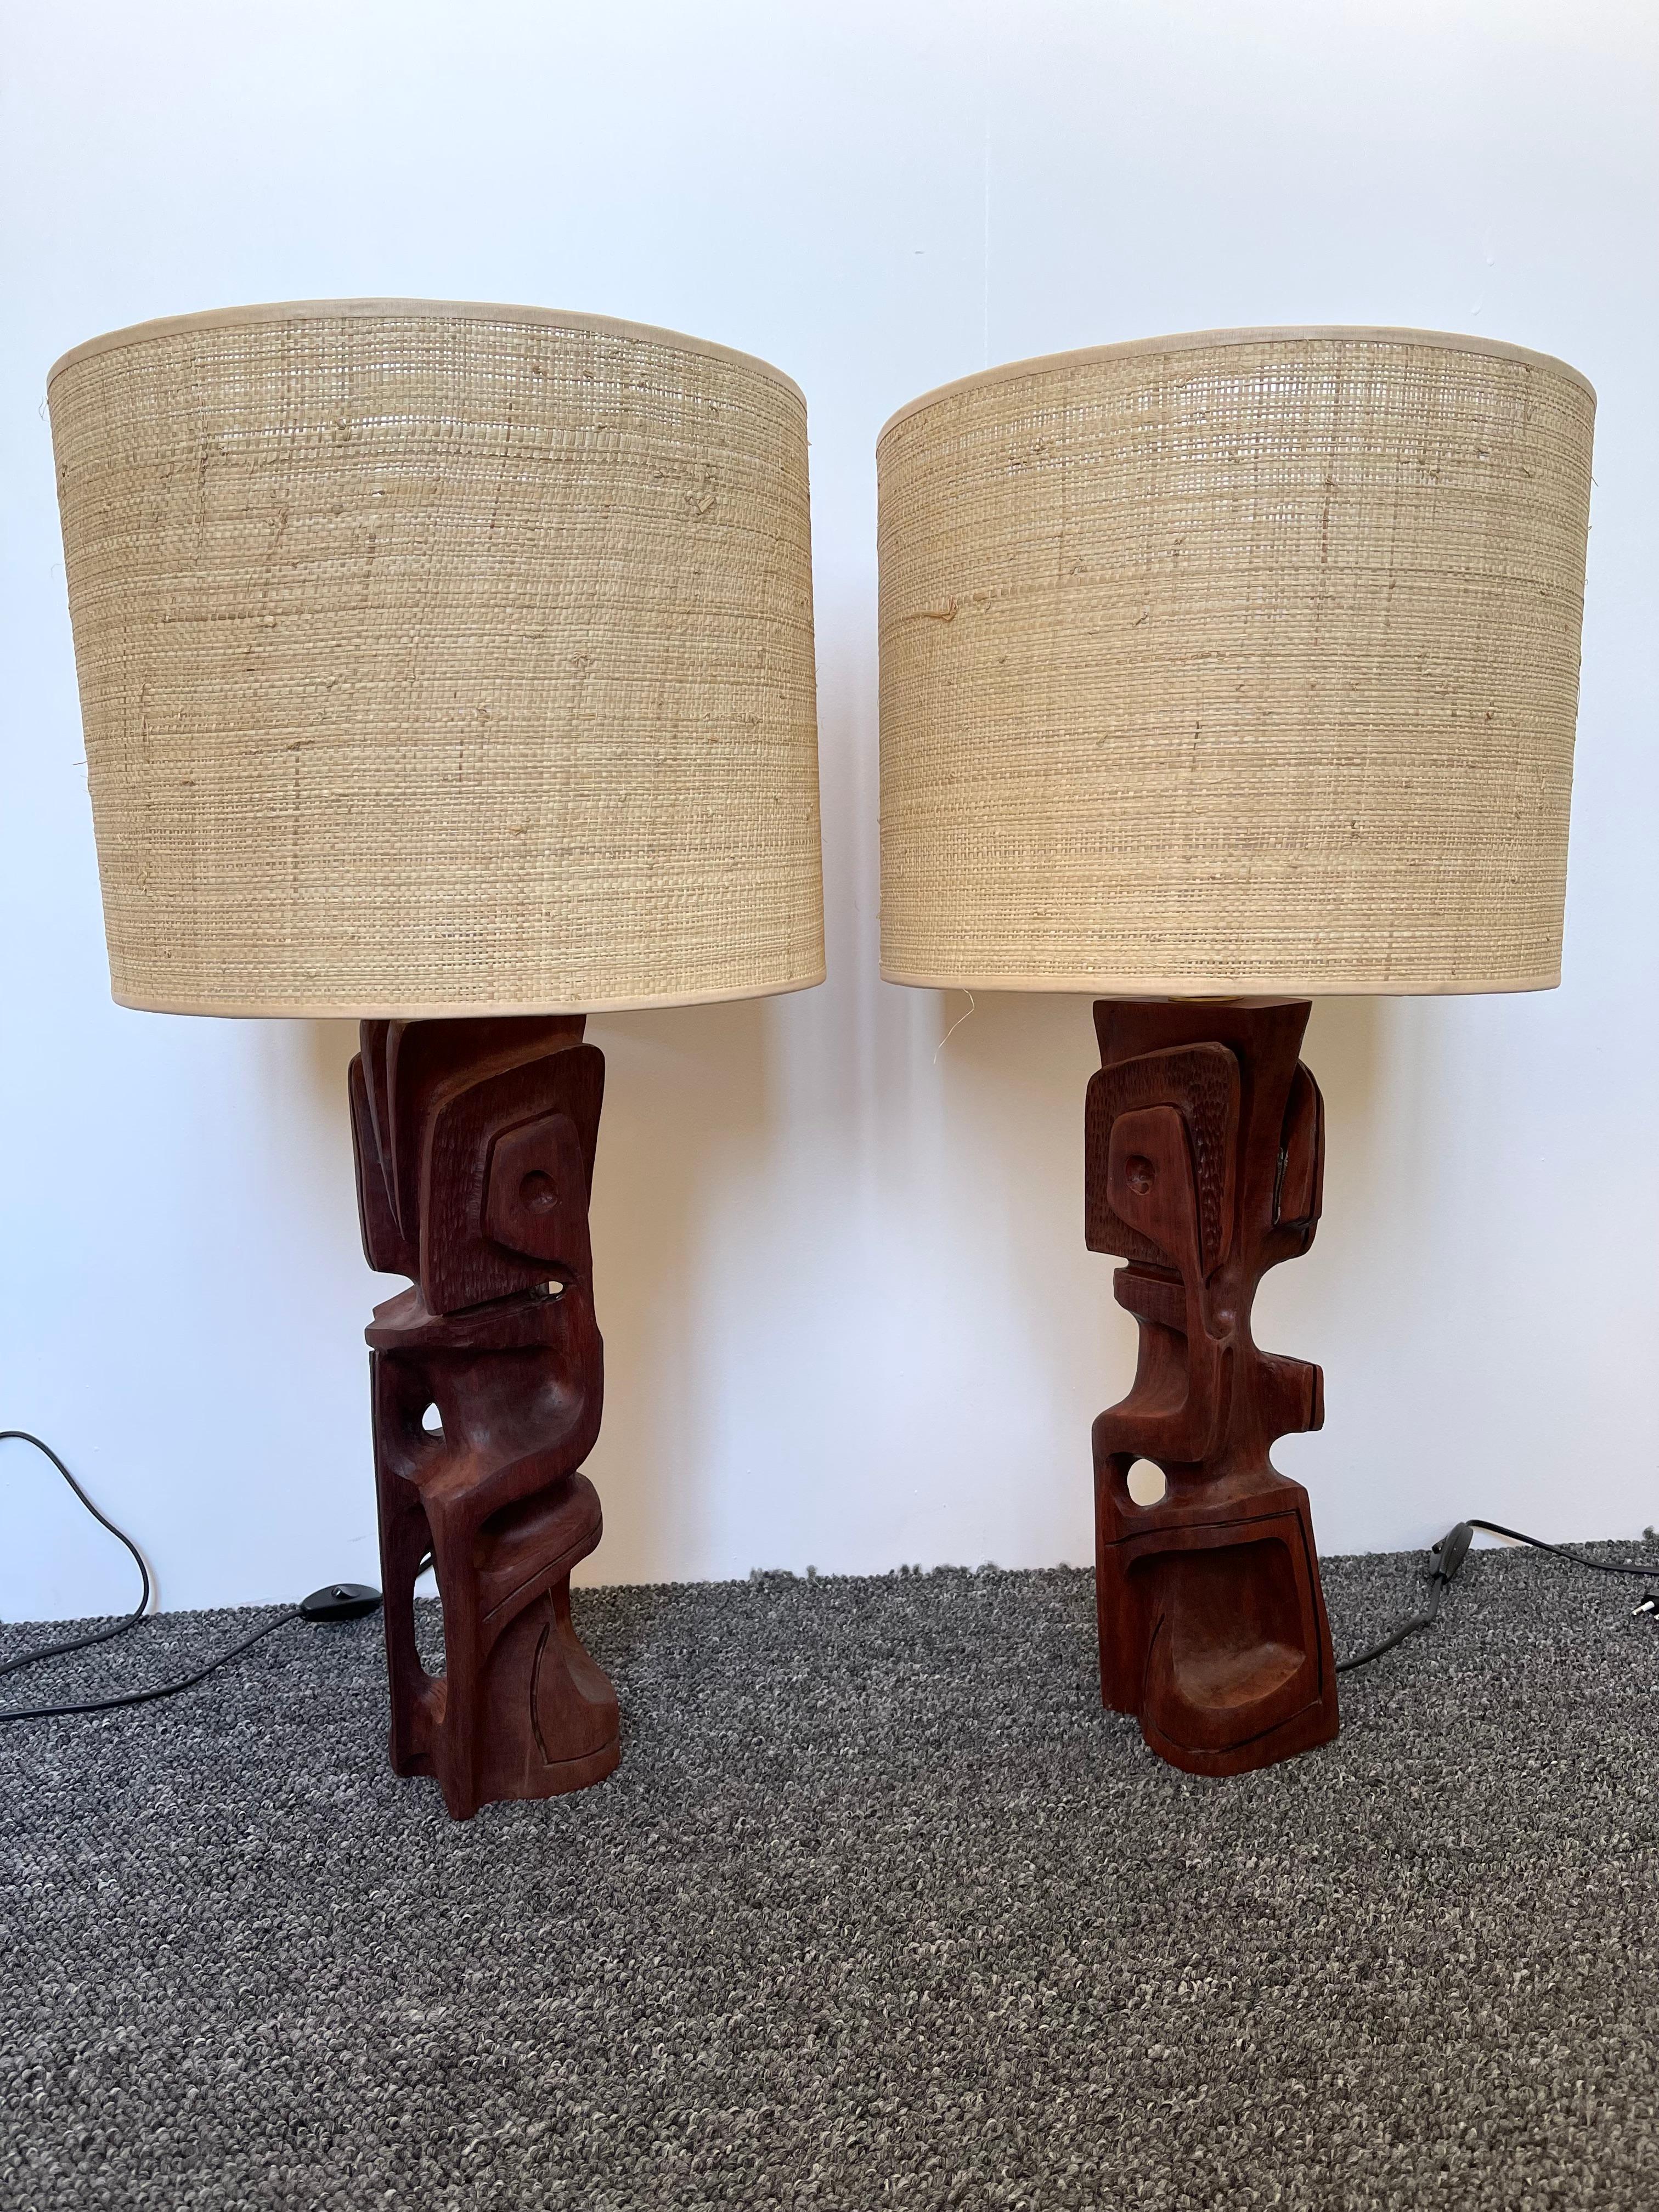 Pair of Wood Sculpture Lamps by Gianni Pinna. Italy, 1970s For Sale 4